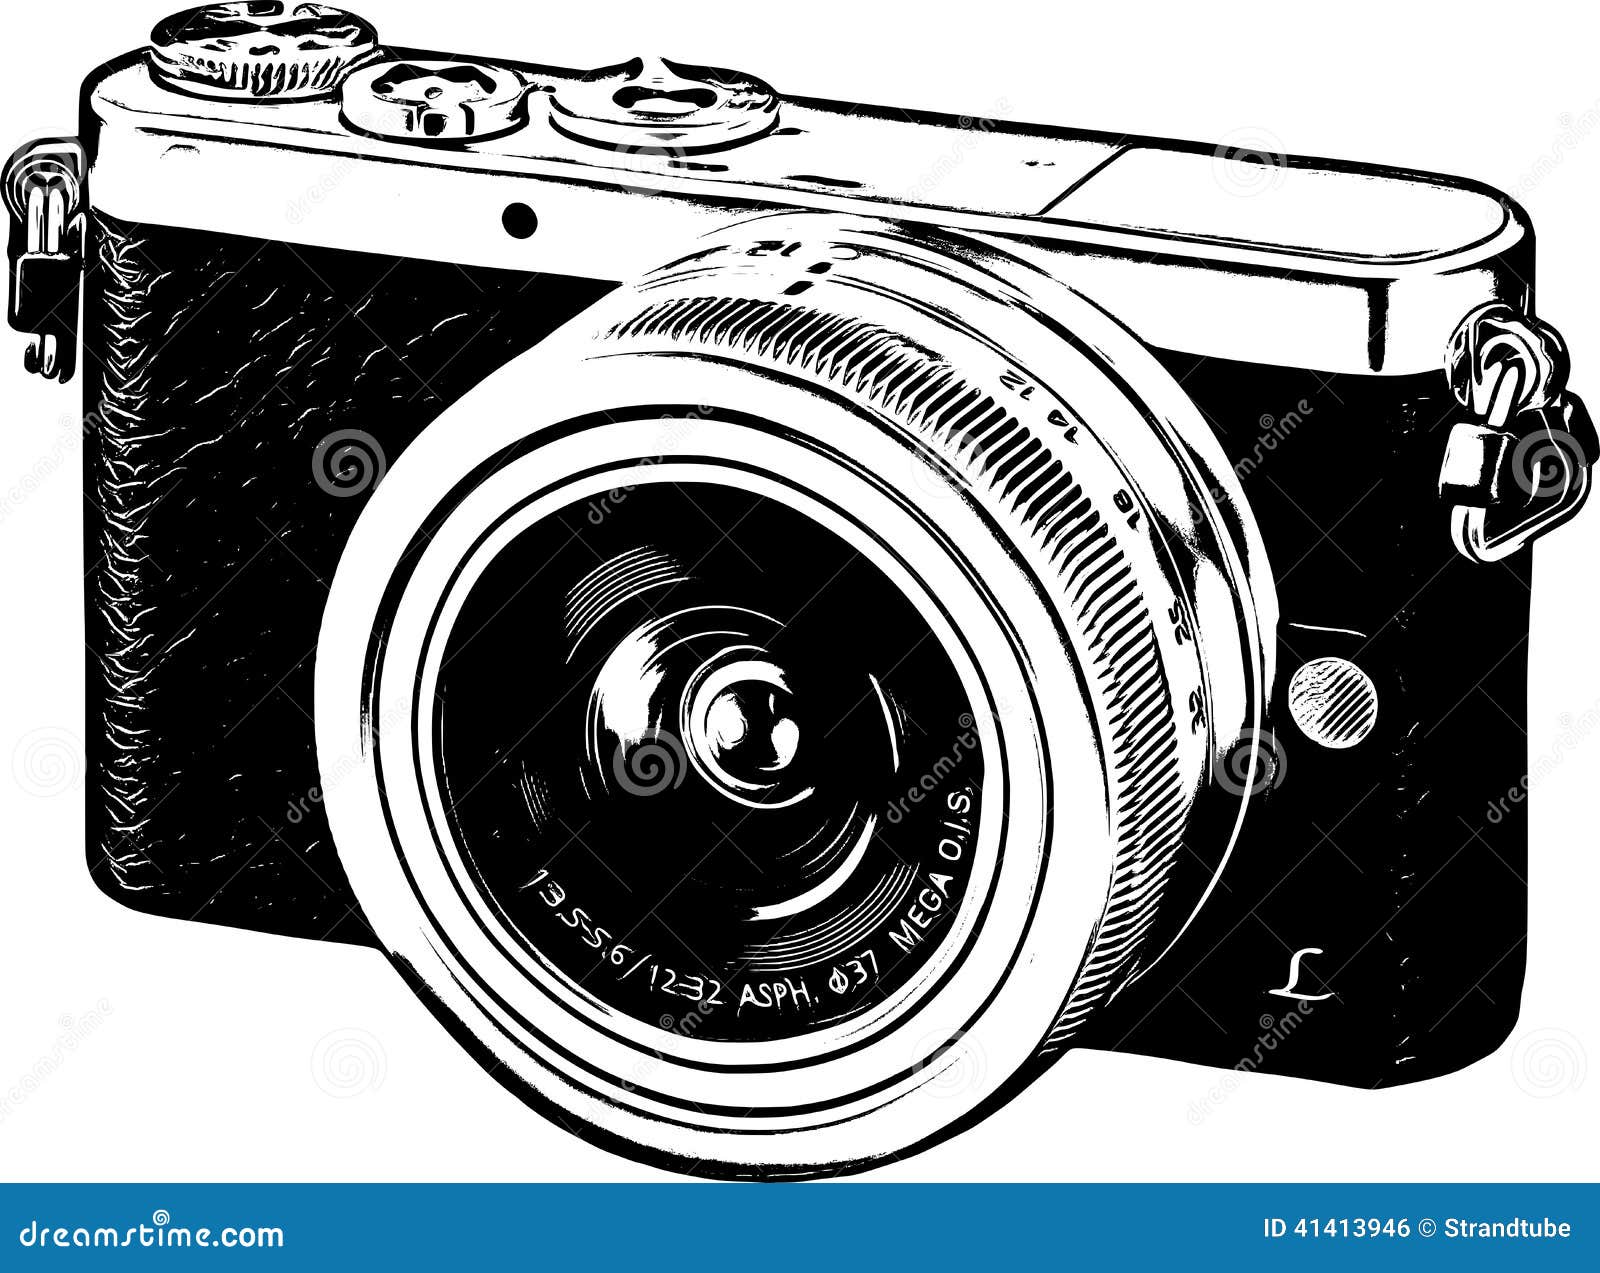 clipart of camera black and white - photo #49